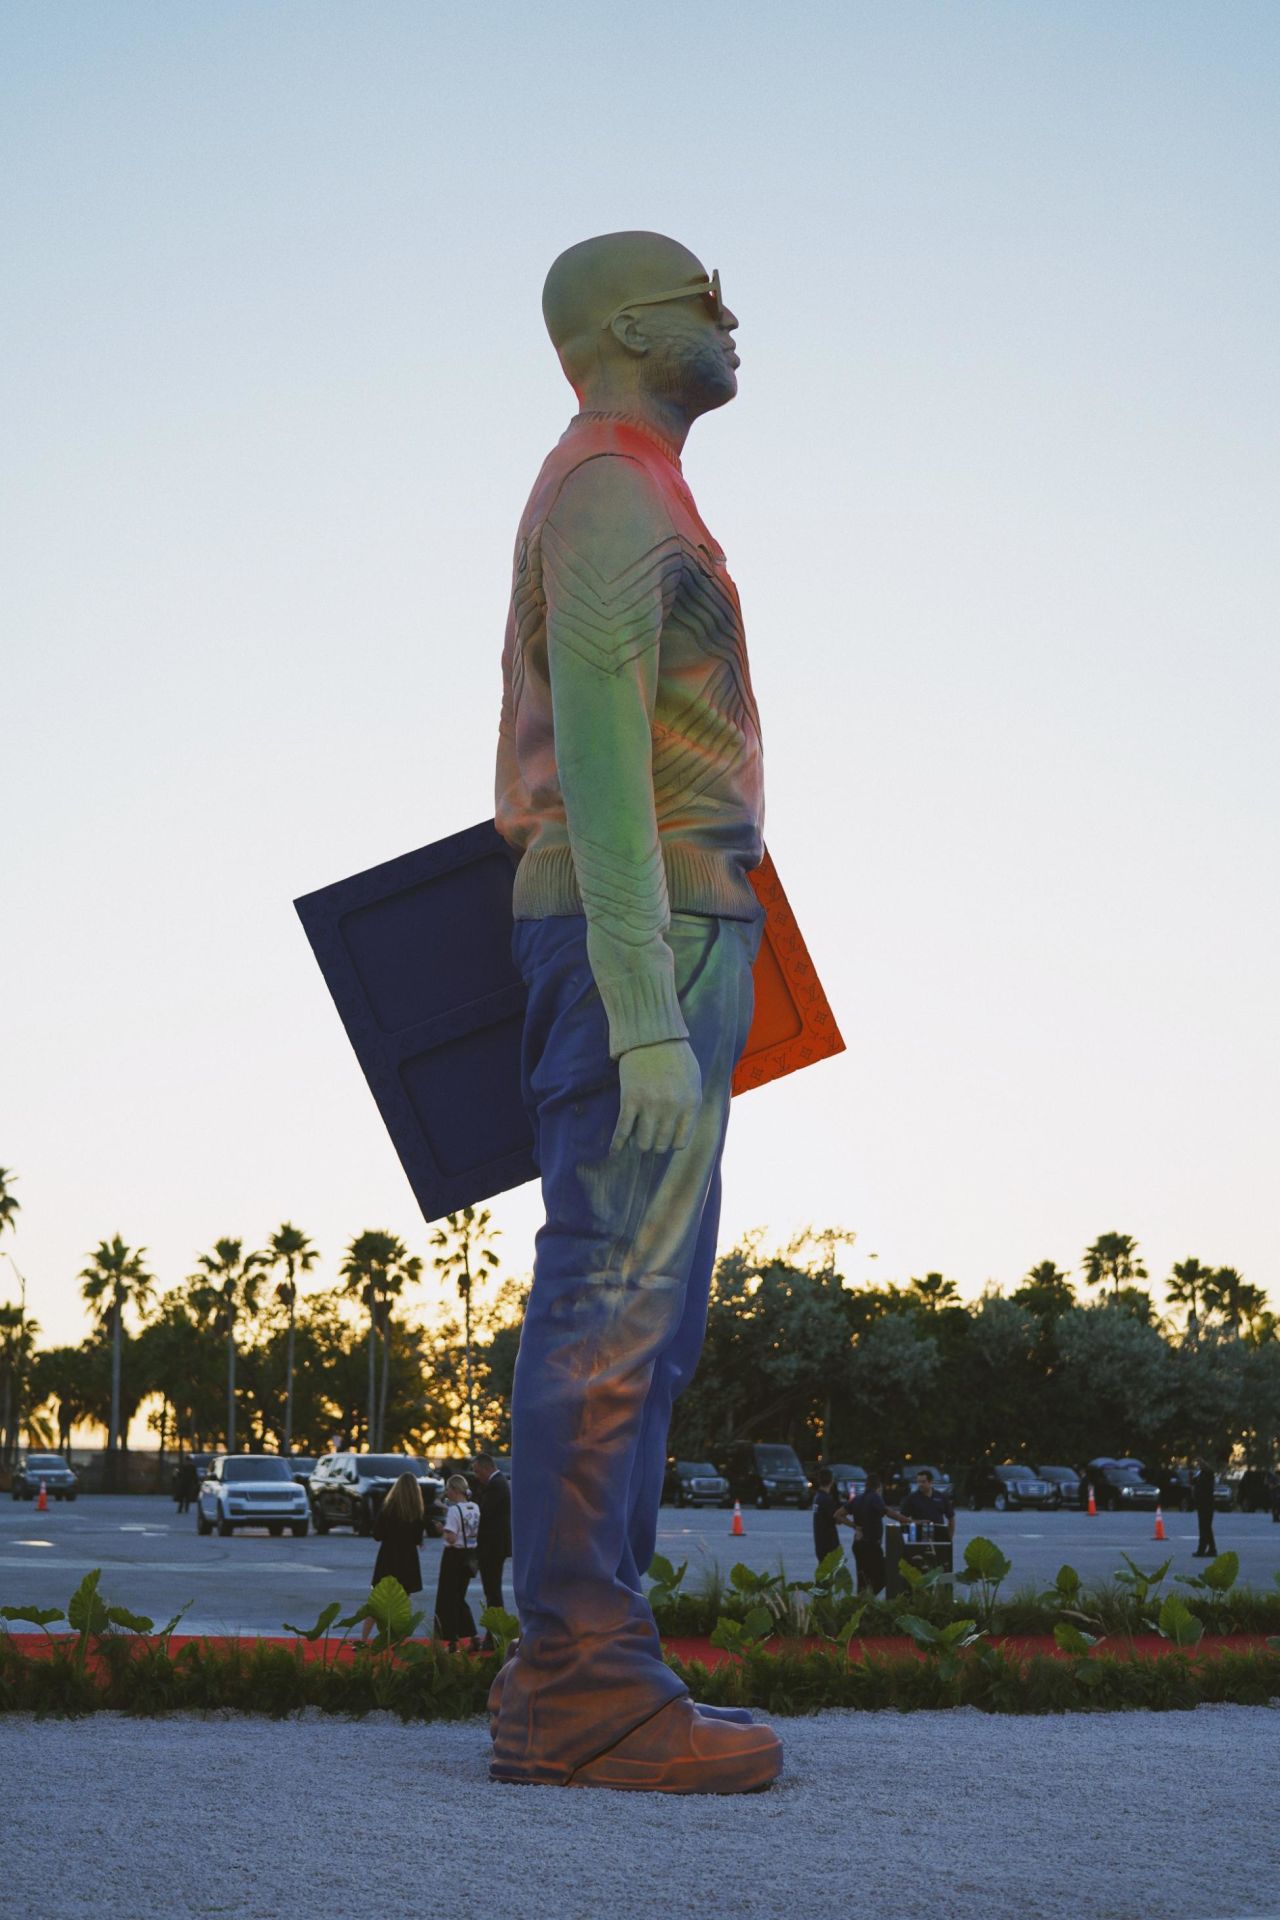 The tribute included a three-story tall statue of Virgil Abloh.